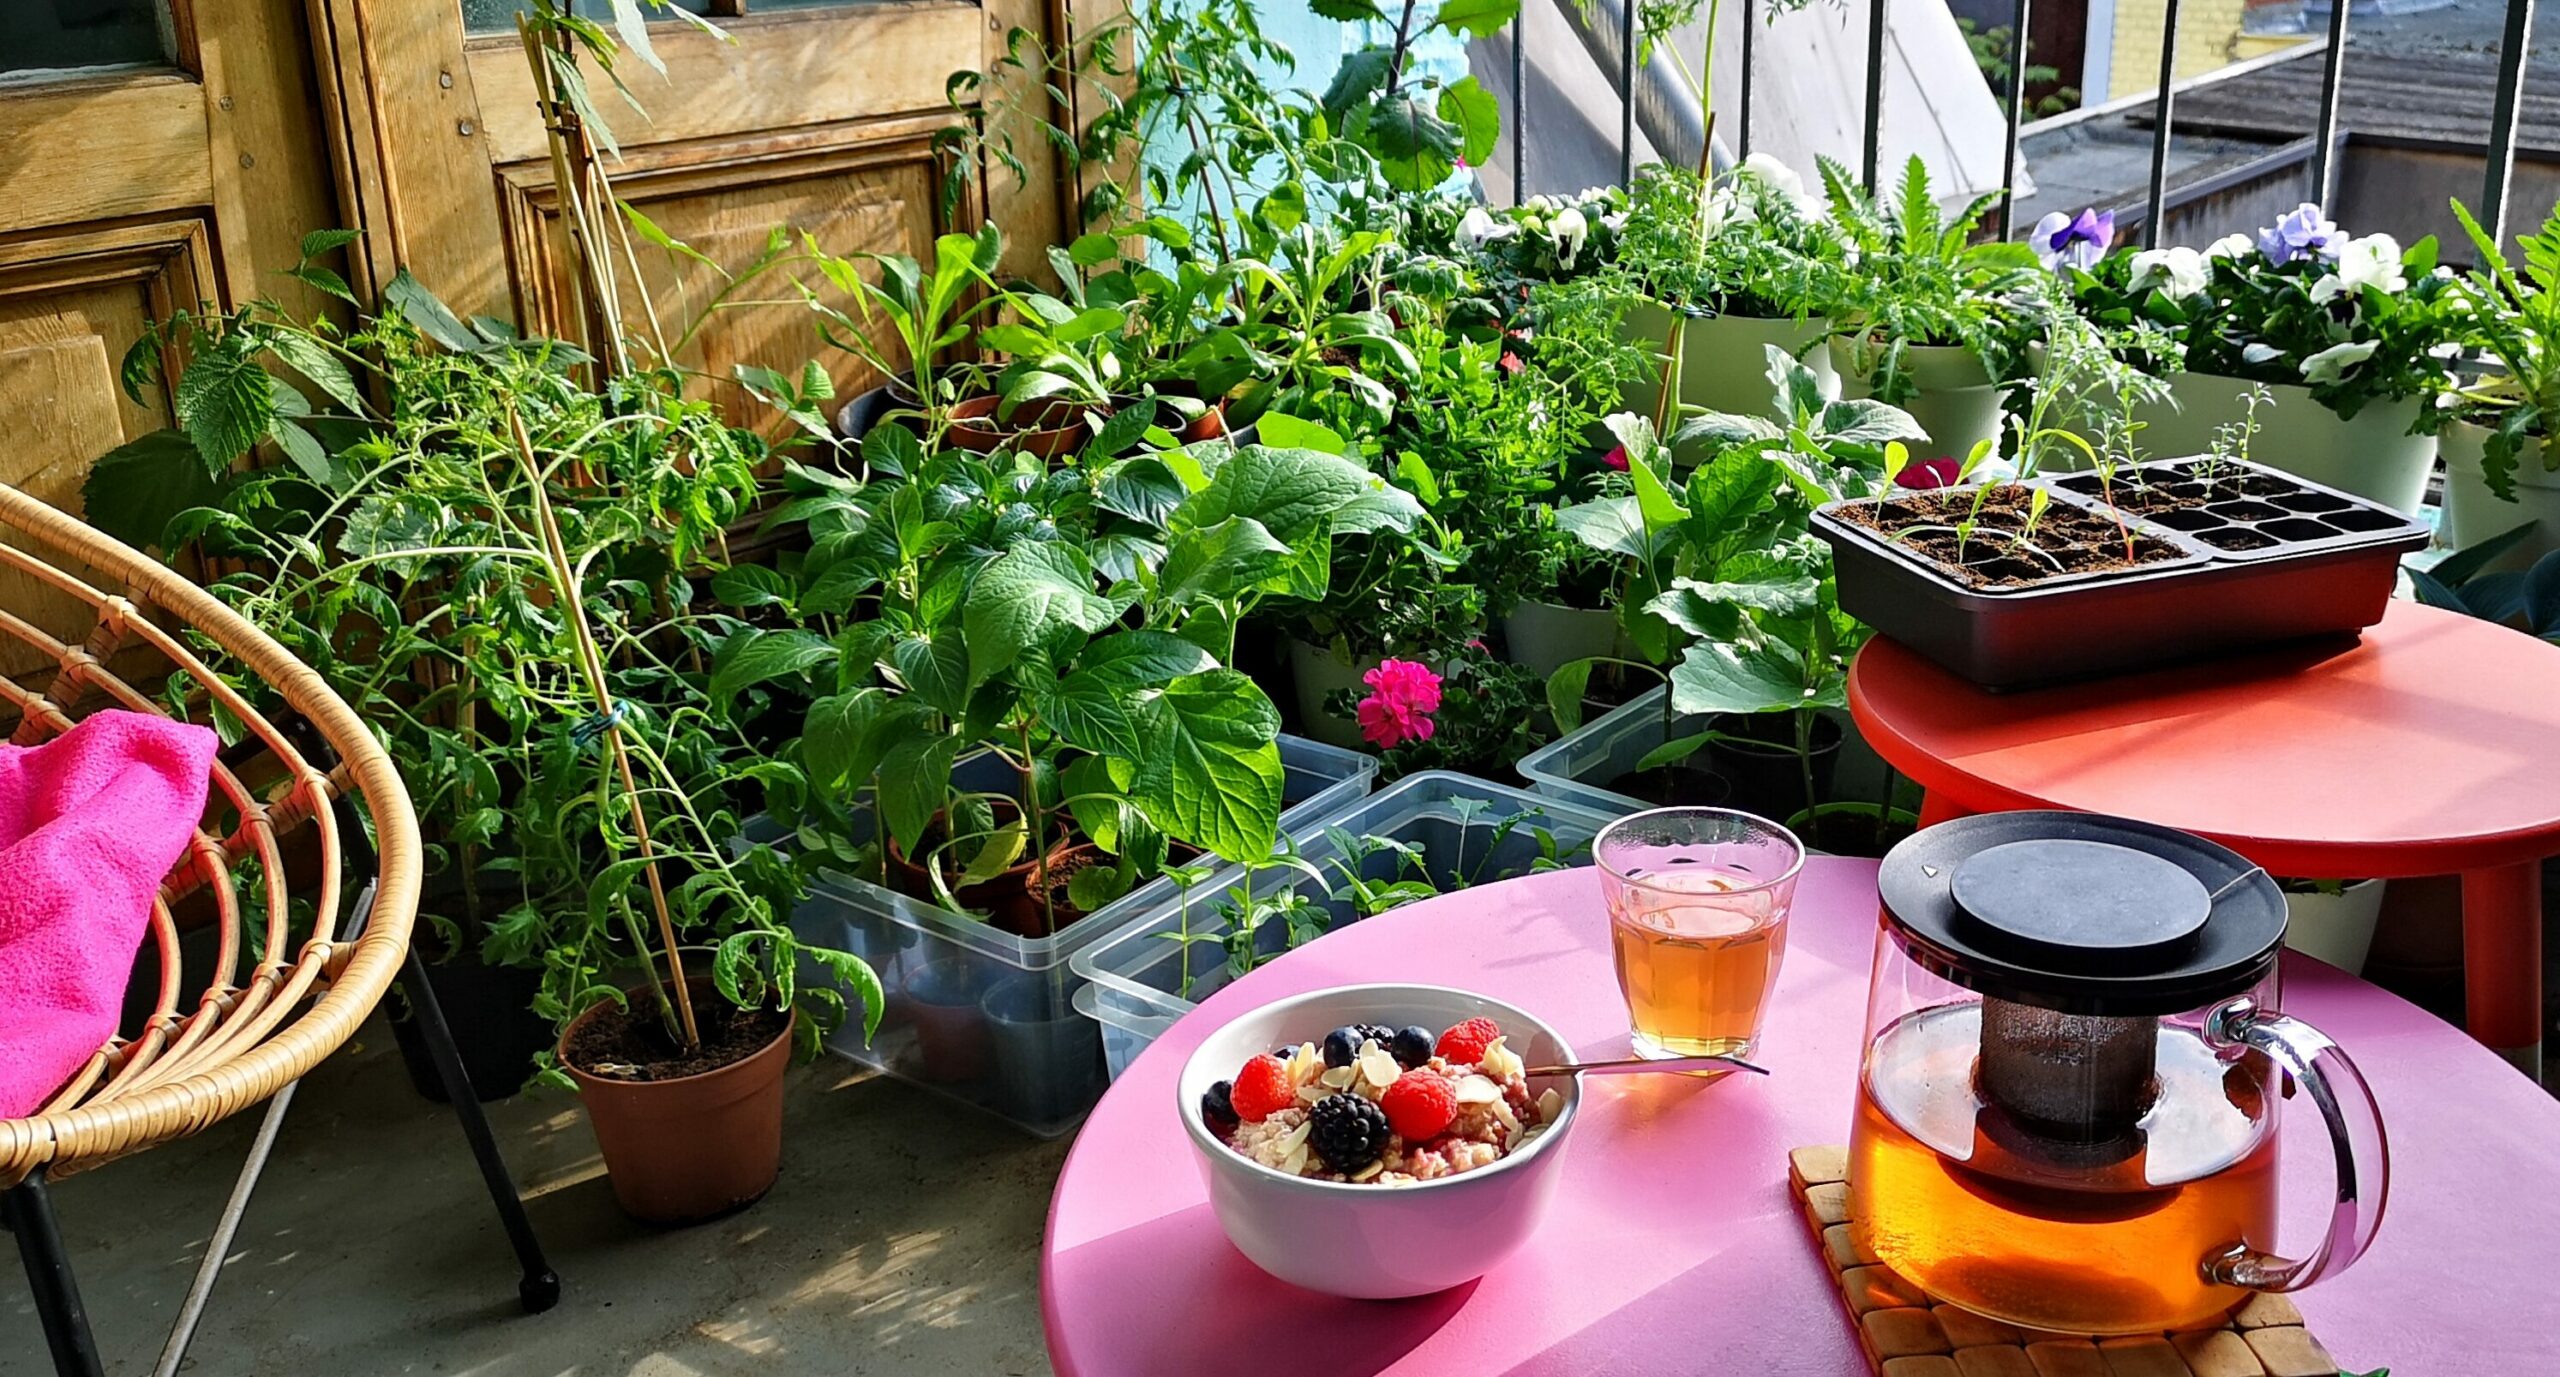 Breakfast on the balcony with the plant family